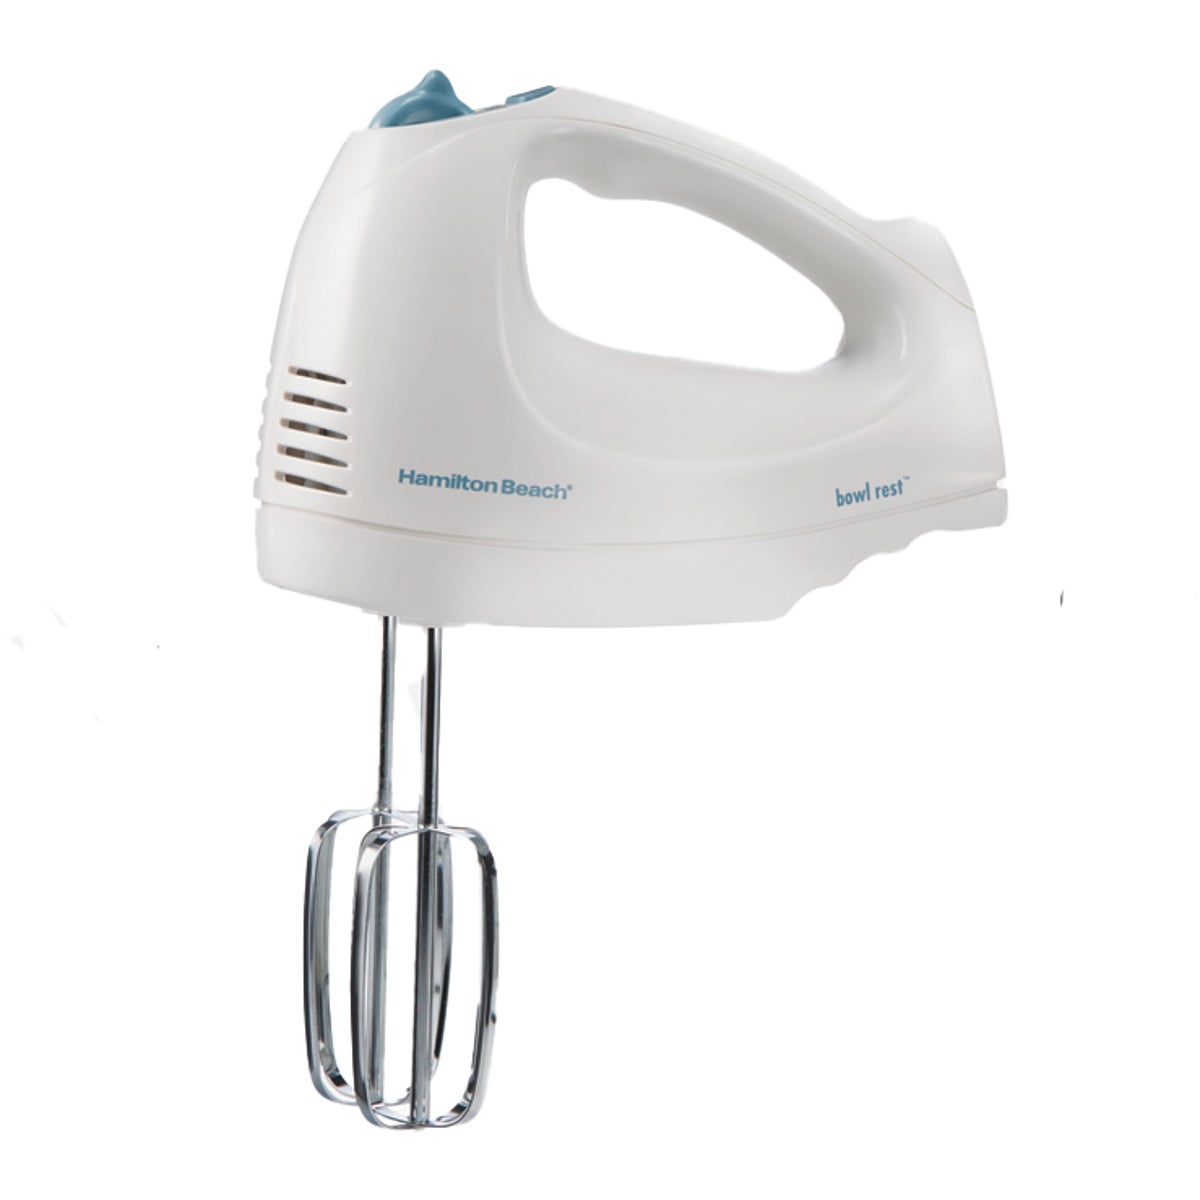 Item 650170, The Hamilton Beach 6 Speed Hand Mixer is designed for fast, easy mixing.